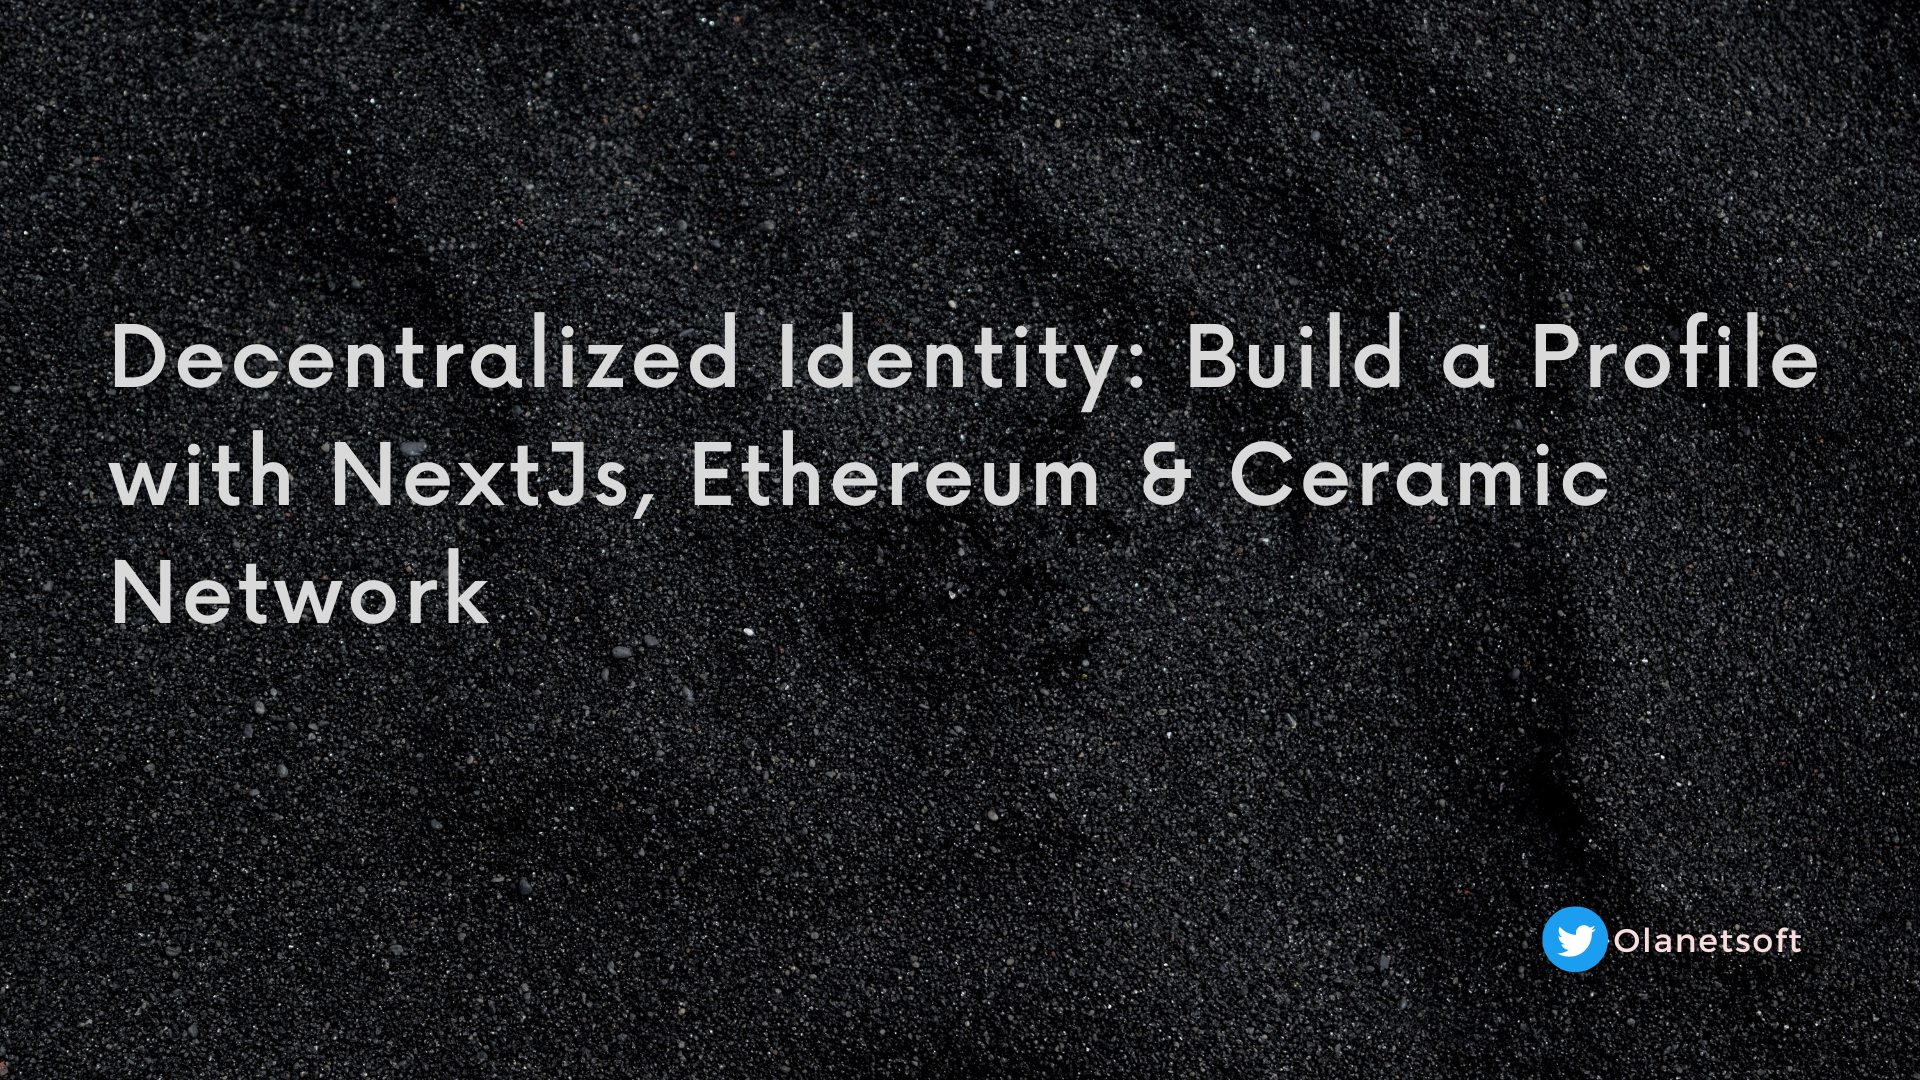 Decentralized Identity – Build a Profile with Next.js, Ethereum & Ceramic Network